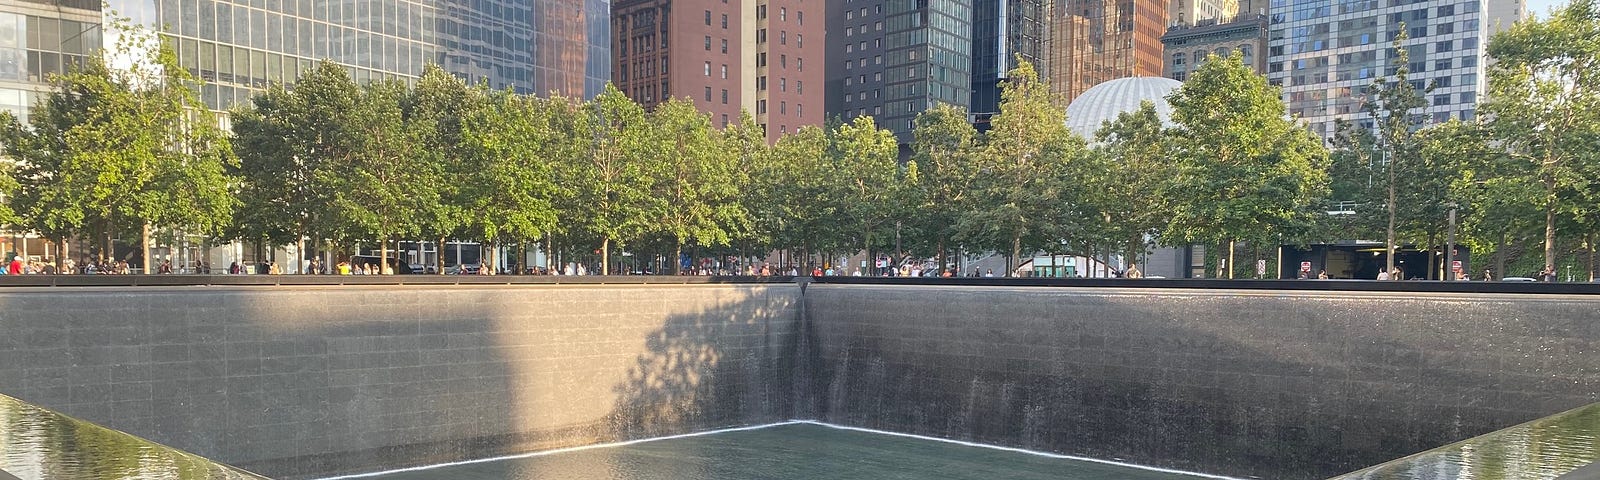 A view of the 9/11 Memorial